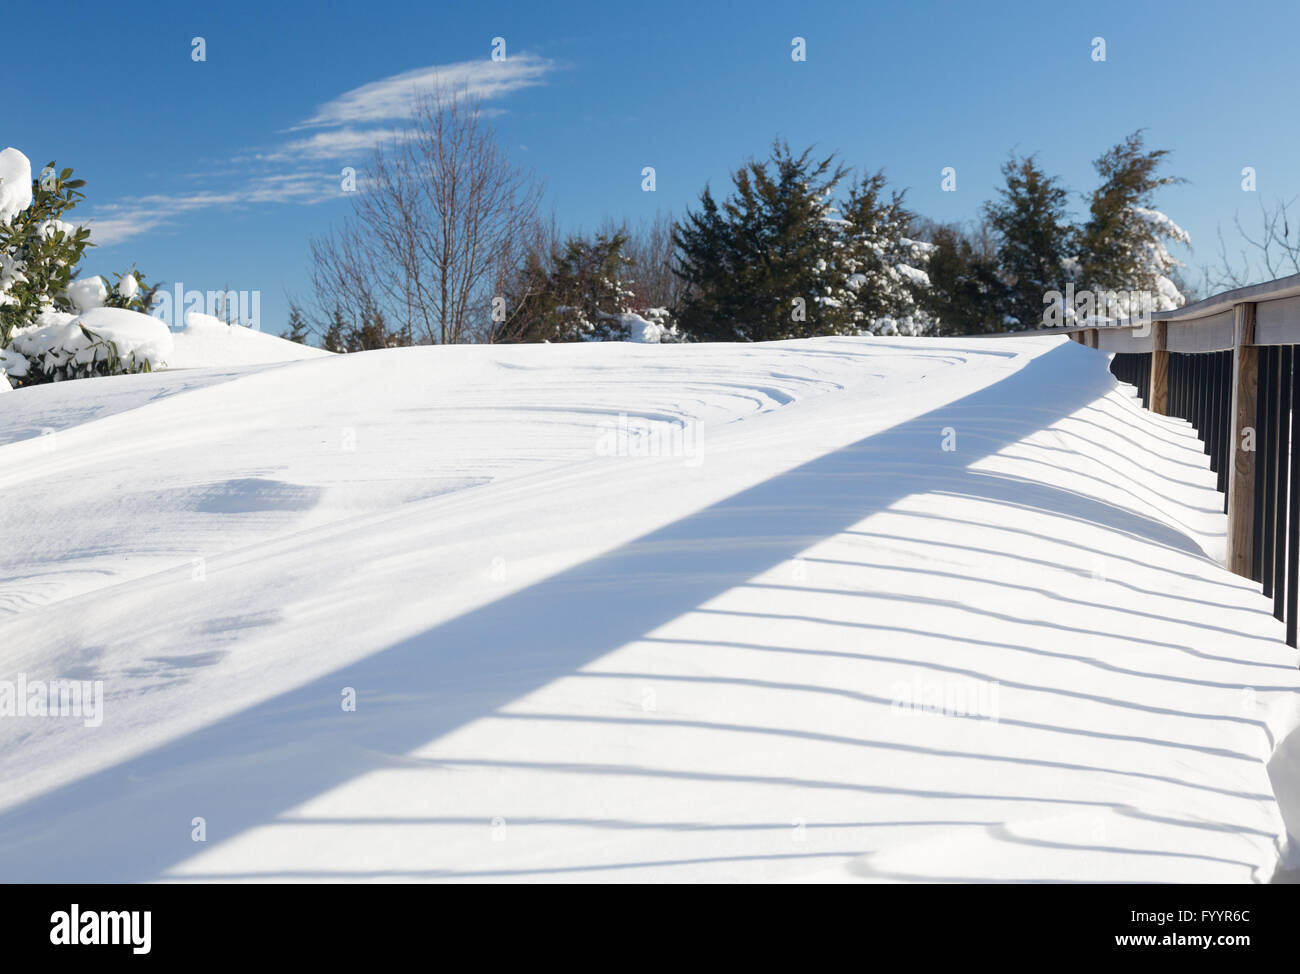 Deep snow in drifts on deck in back yard Stock Photo